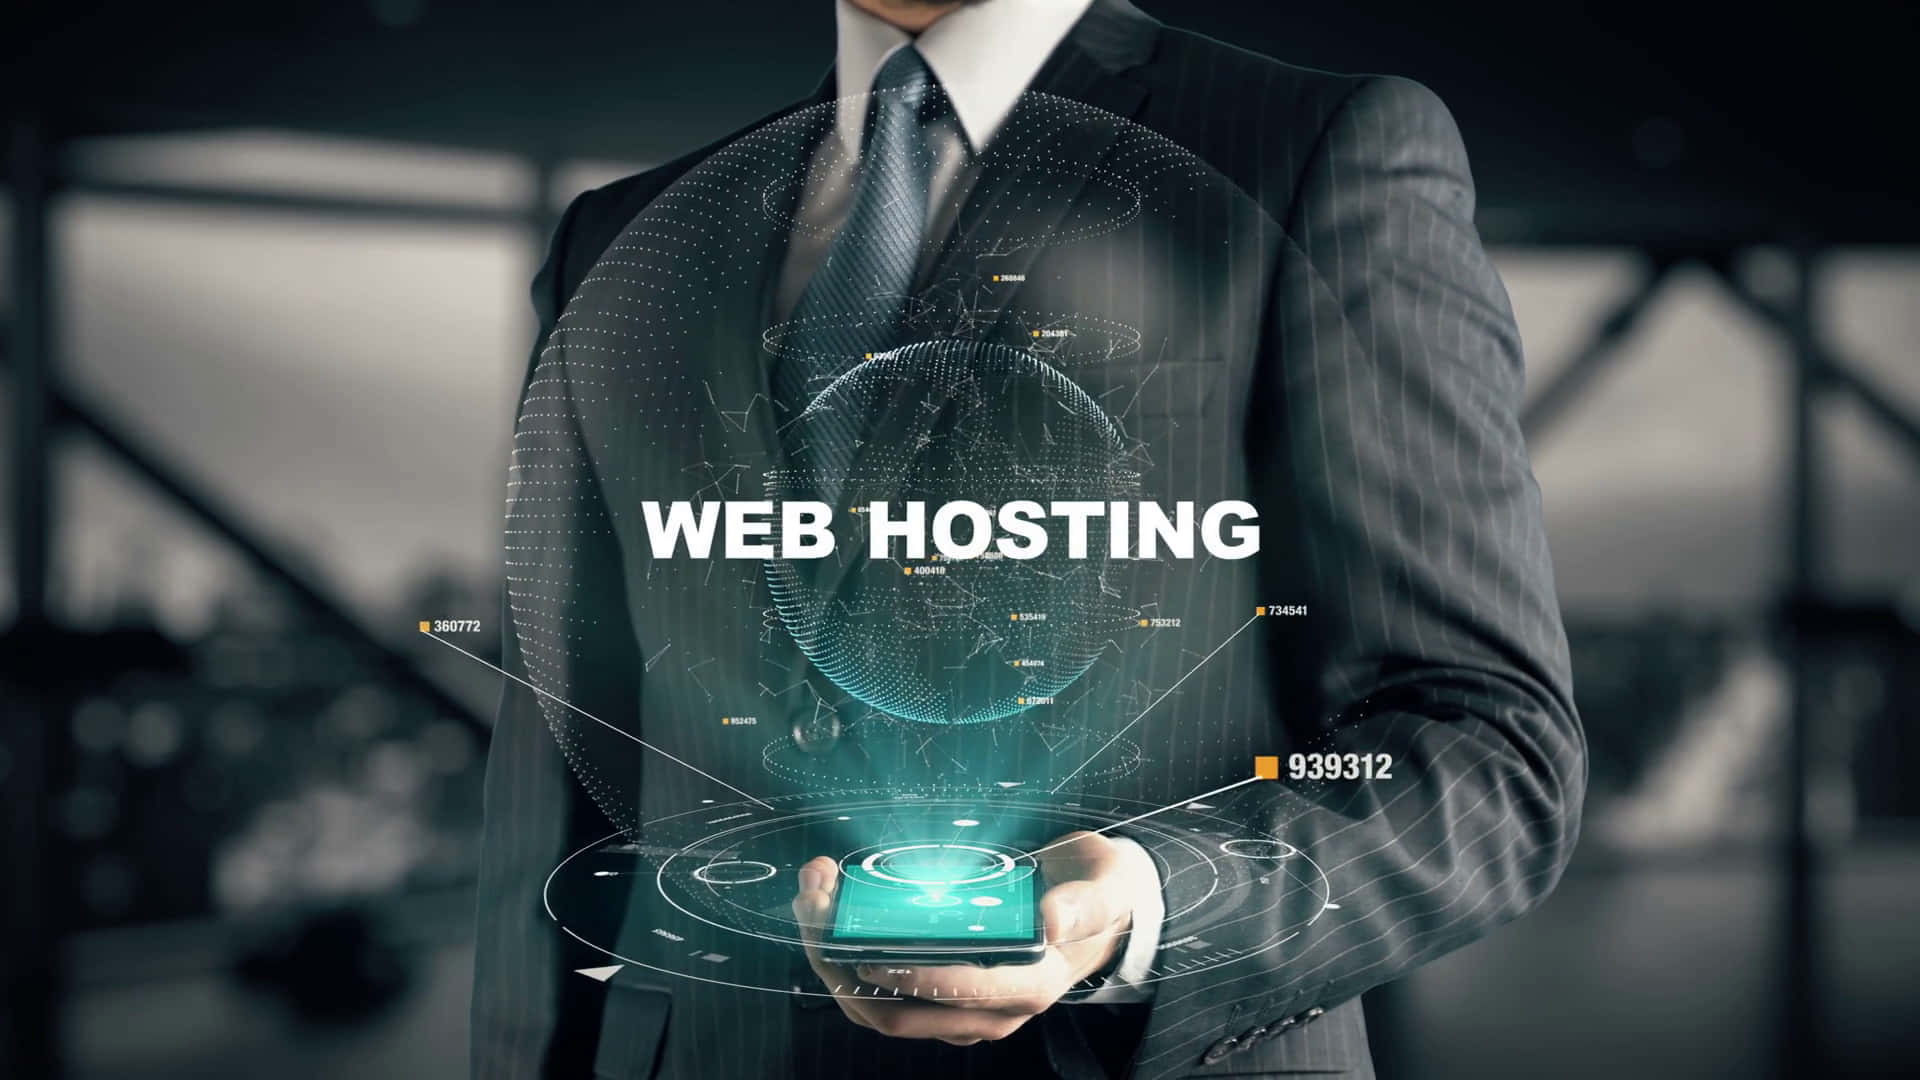 Web Hosting - What Is It? Wallpaper